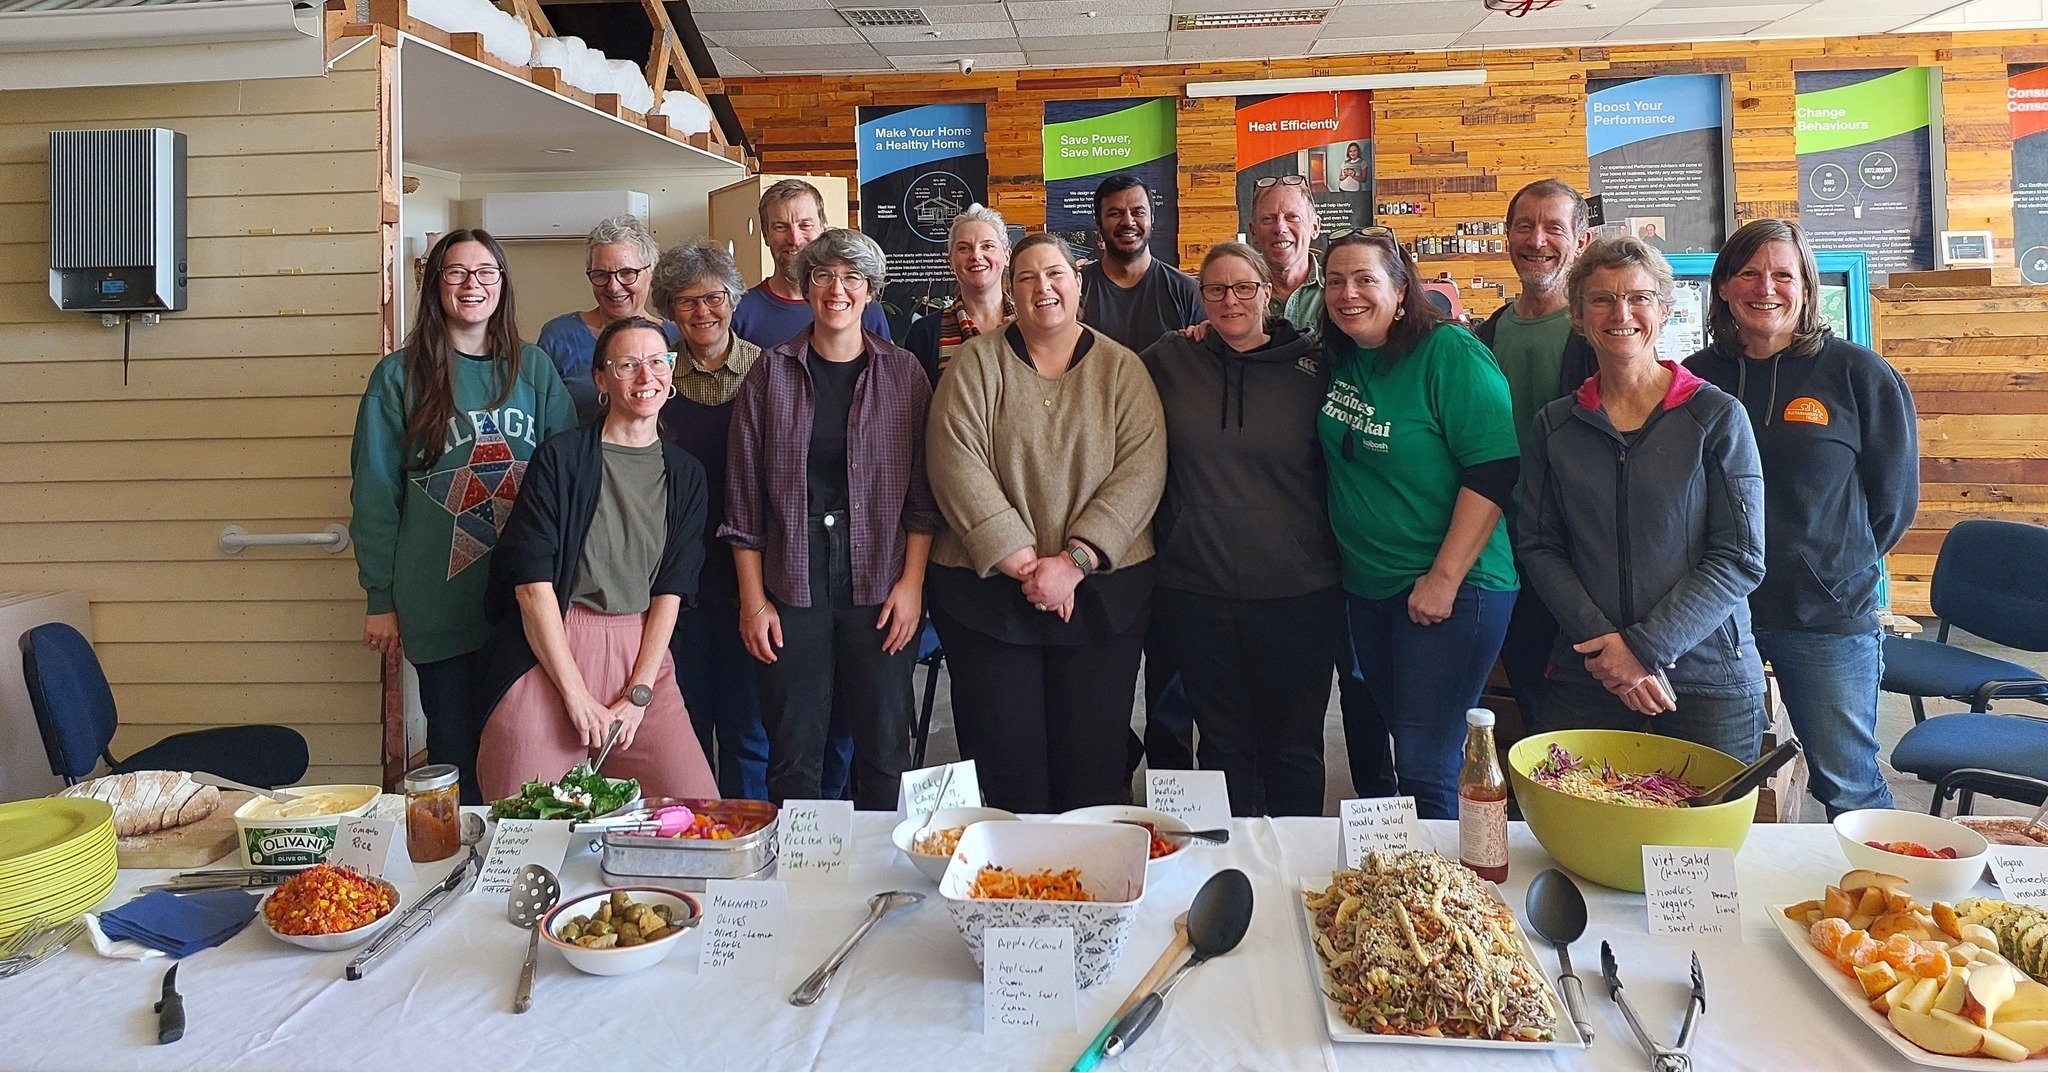 🌱🥗 Yesterday, the Sustainability Trust team had a blast at our pun-filled, quiz-tastic salad-bration, all in support of Make a Meal in May for Kaibosh! 🥗🌱

Just like our pals at Kaibosh, we're passionate about a future Aotearoa with zero food pov